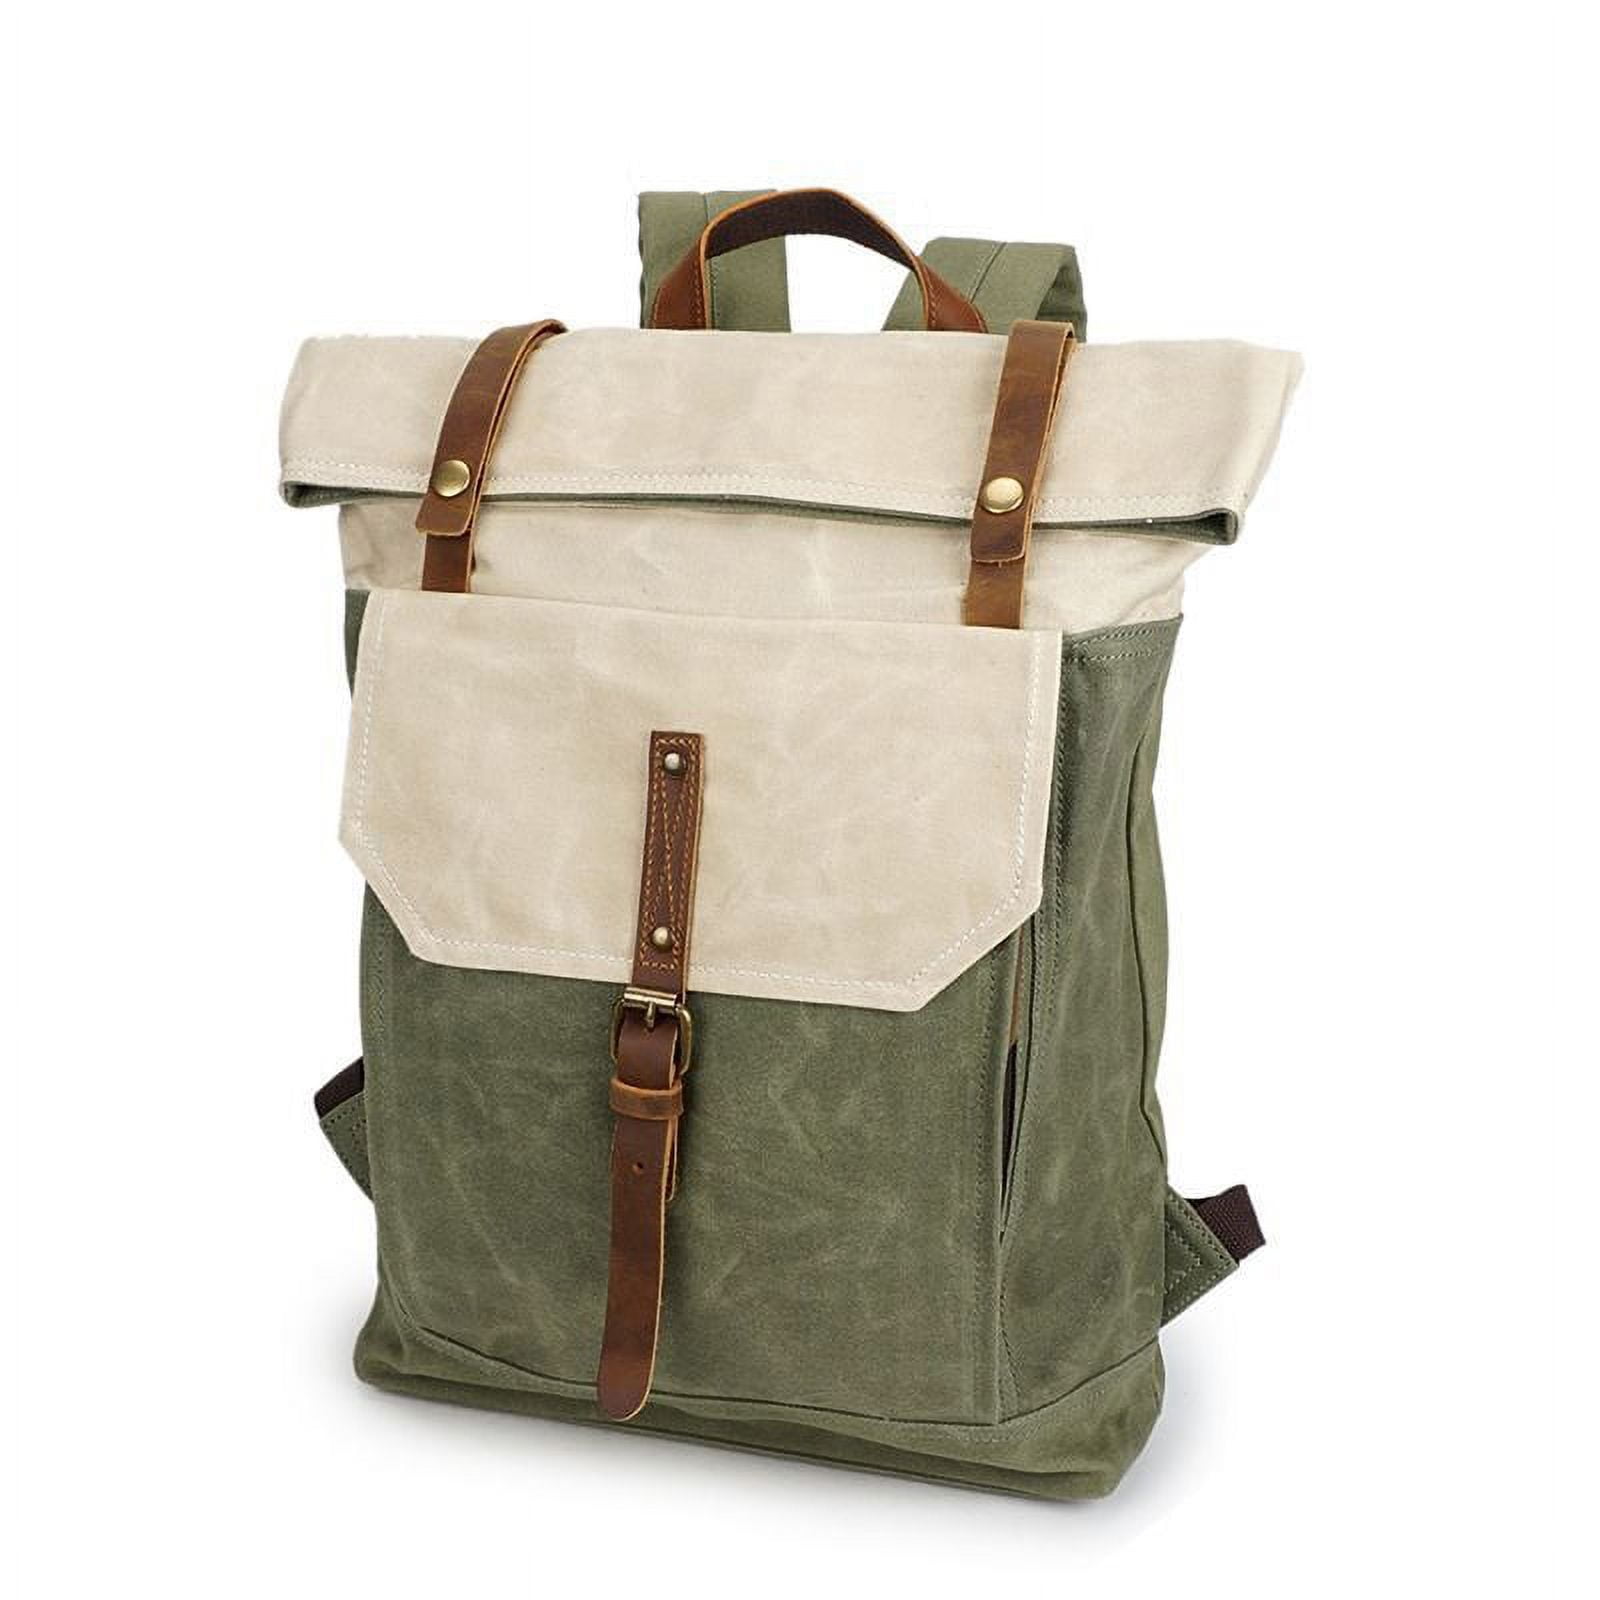 Retro Waxed Canvas Rustic Backpack, Waterproof Roll Top Travel Hiking  Rucksack Leather Daypack 